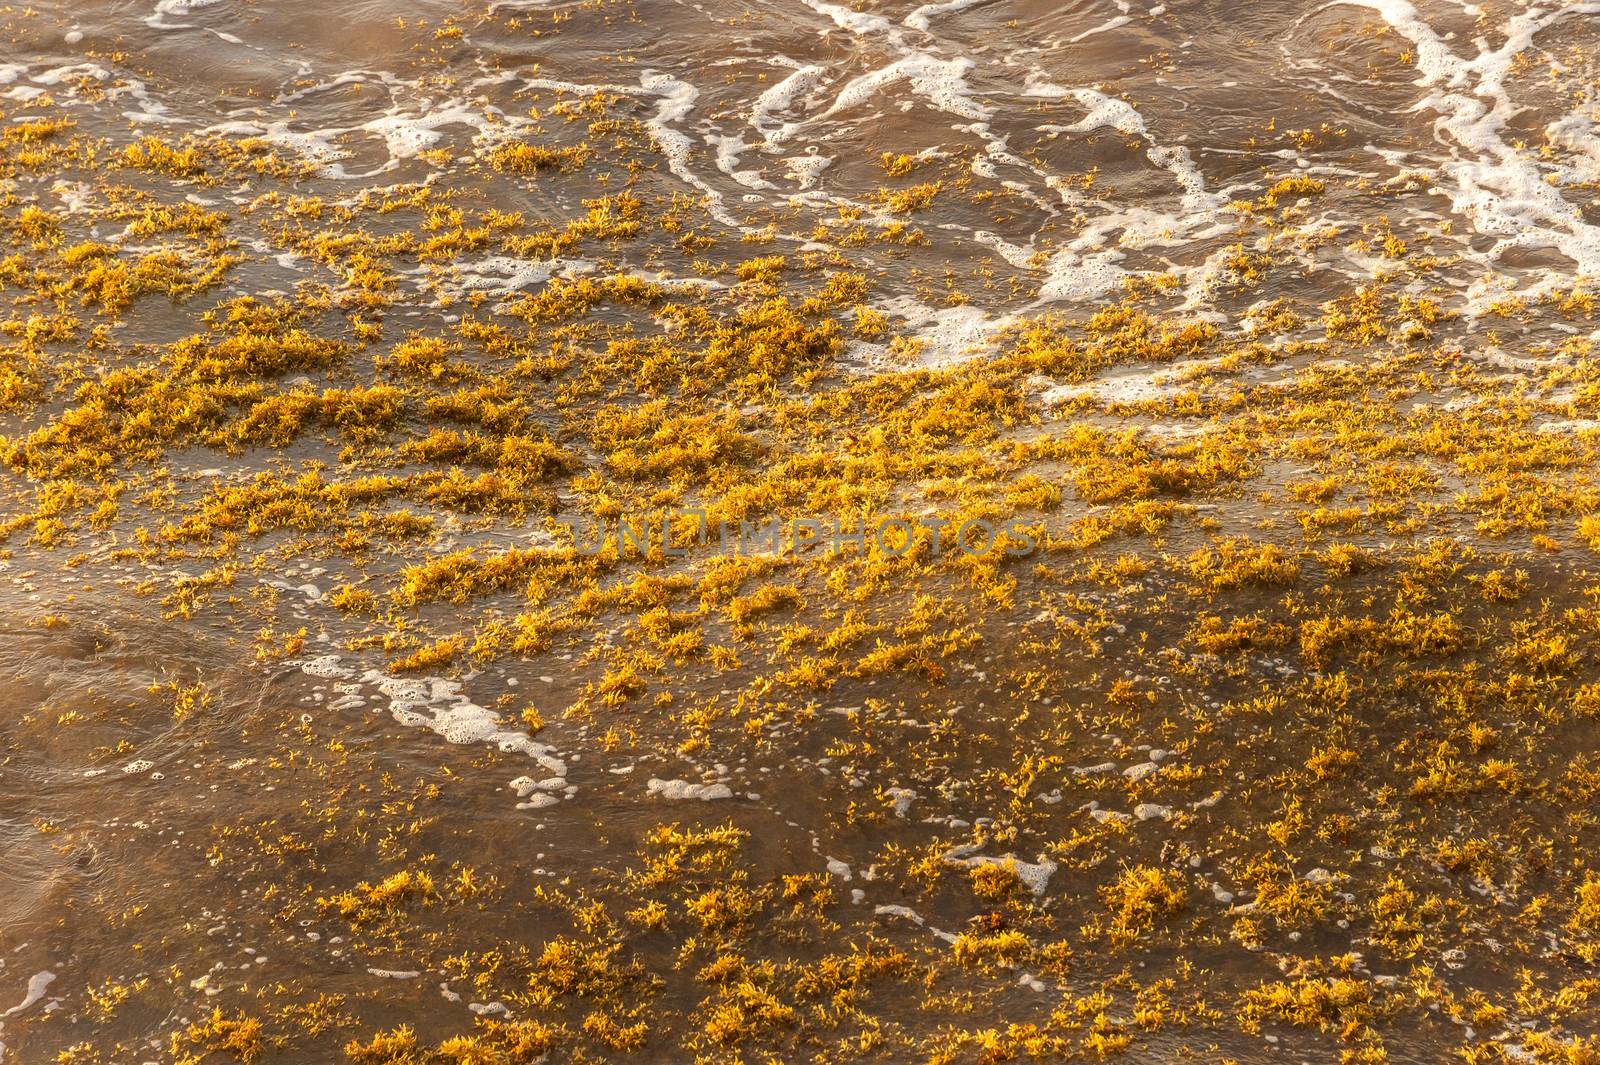 Sargassum seaweed patch floating on the water in Tulum, Mexico. by mbruxelle